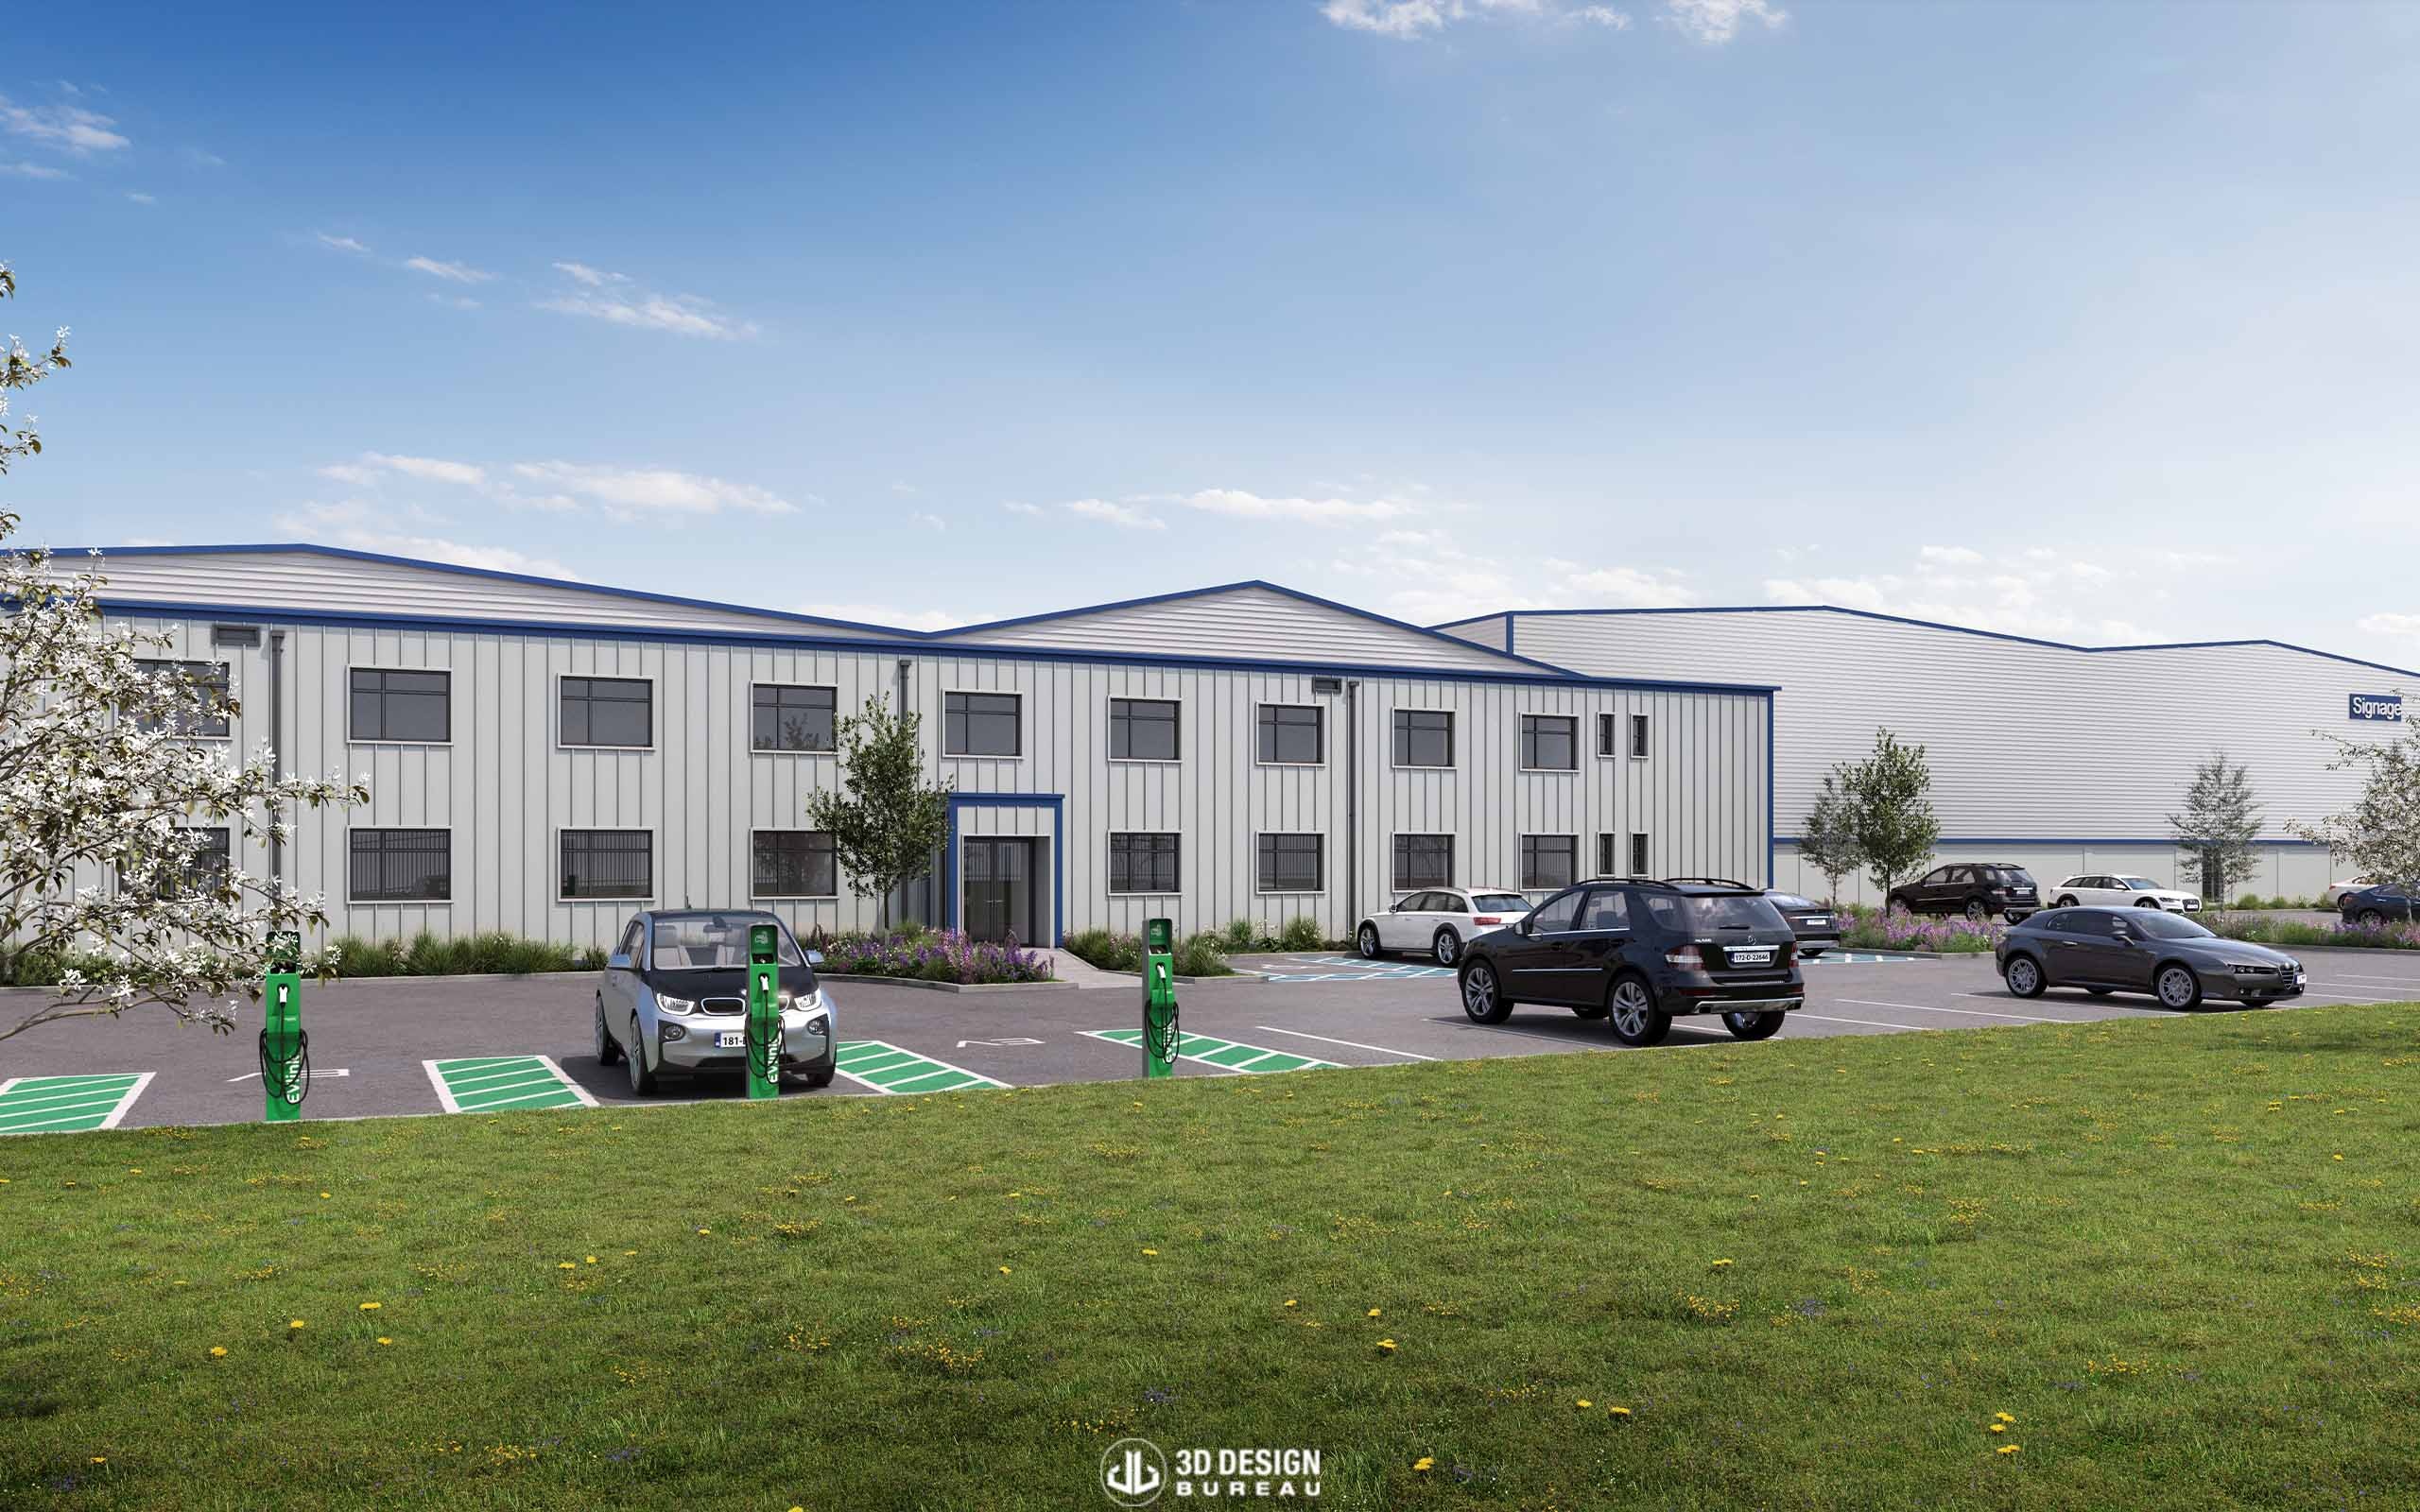 Computer generated imagery of the proposed development Bunzl site in Malahide road Industrial park